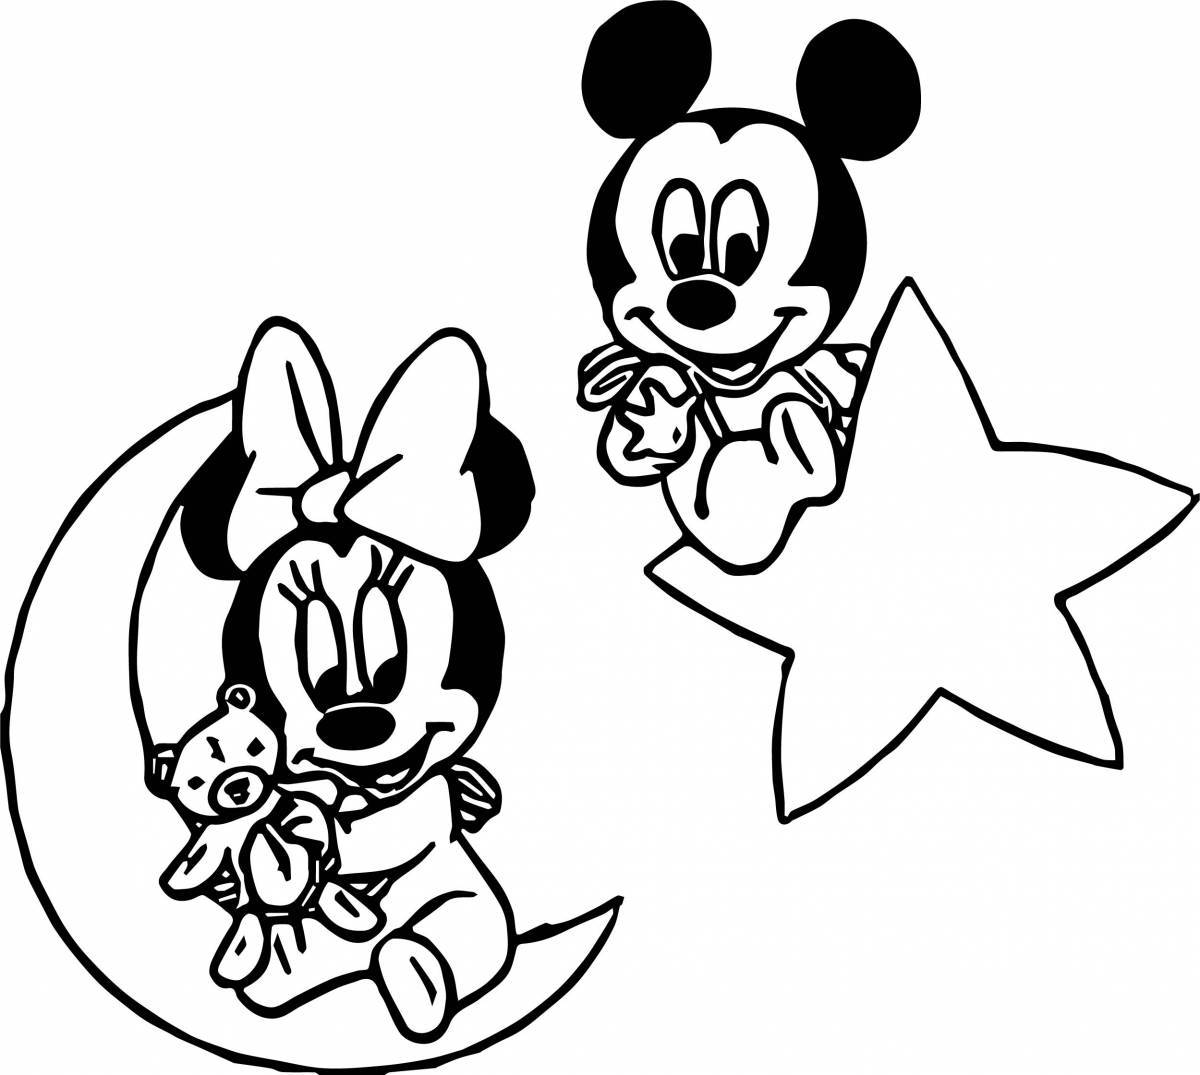 Luminous mickey mouse coloring book for girls